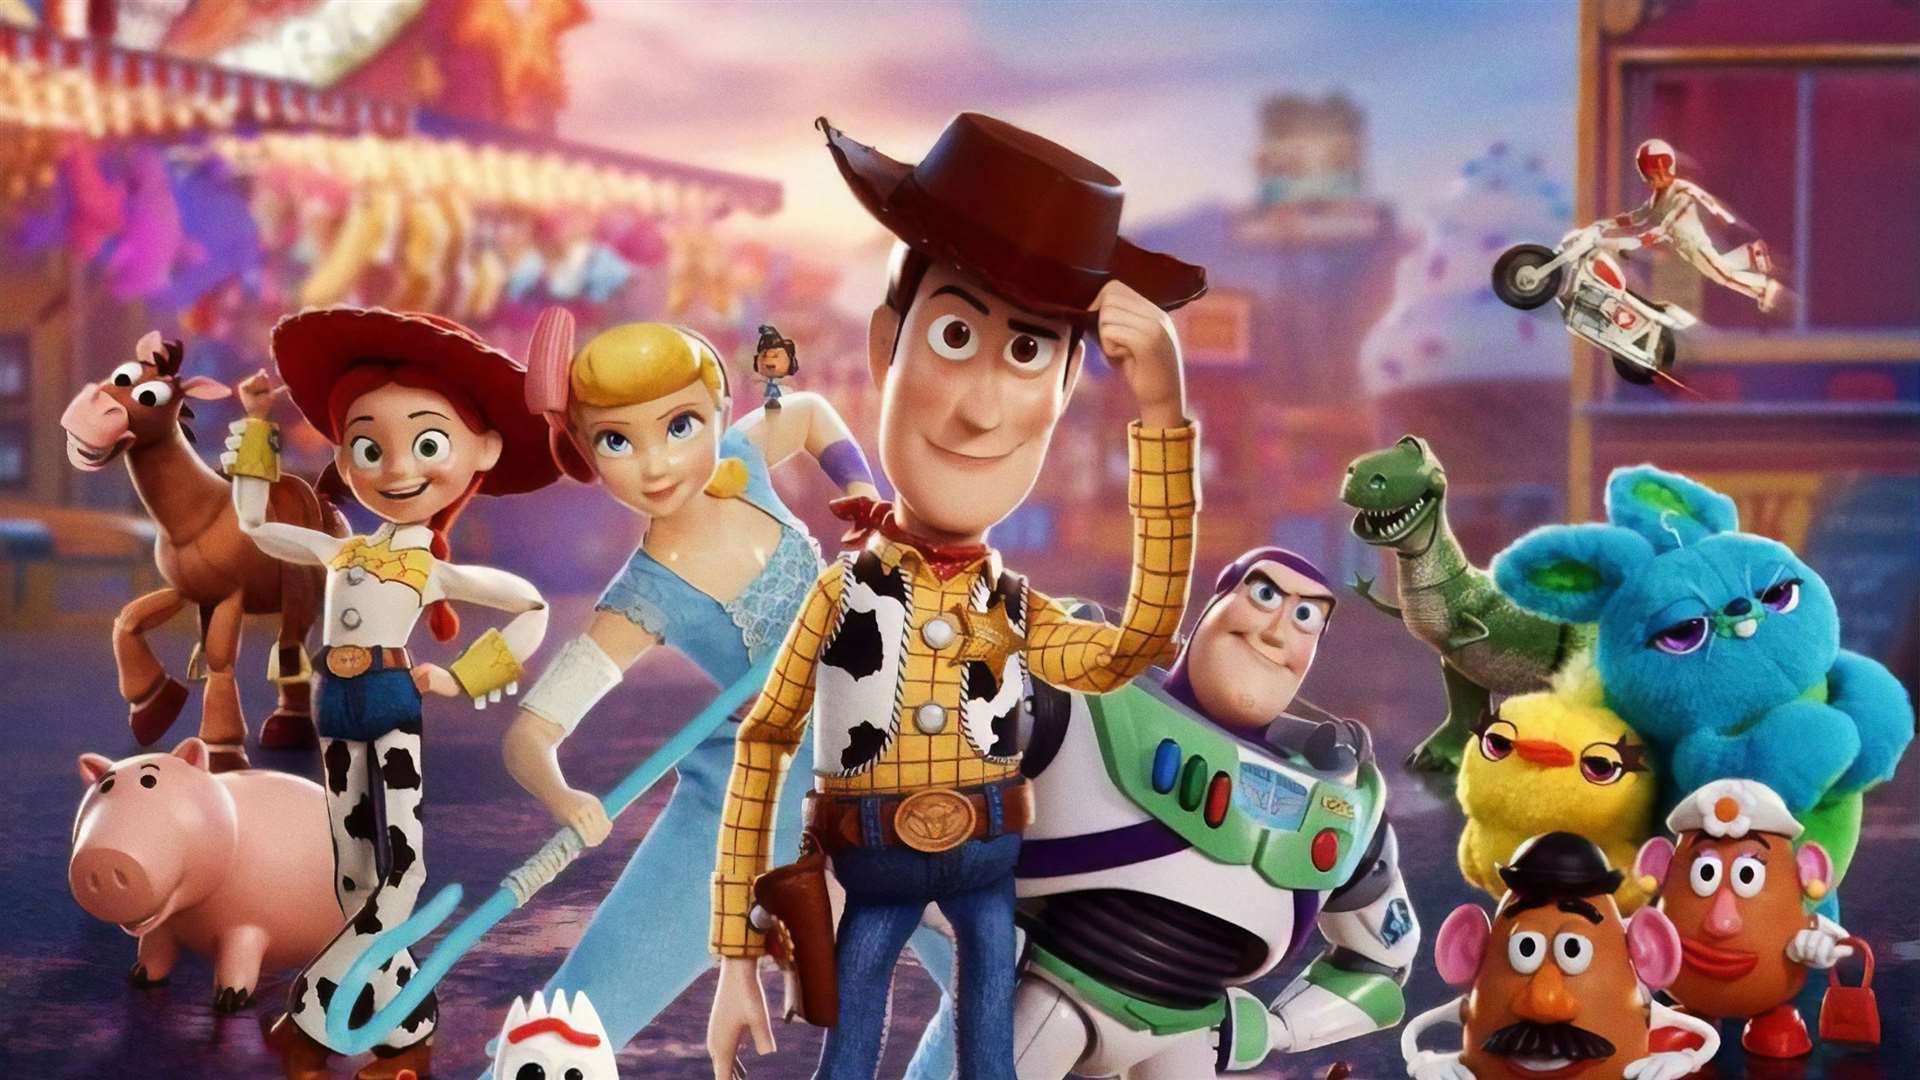 Pixar favourites including the Toy Story films will be available